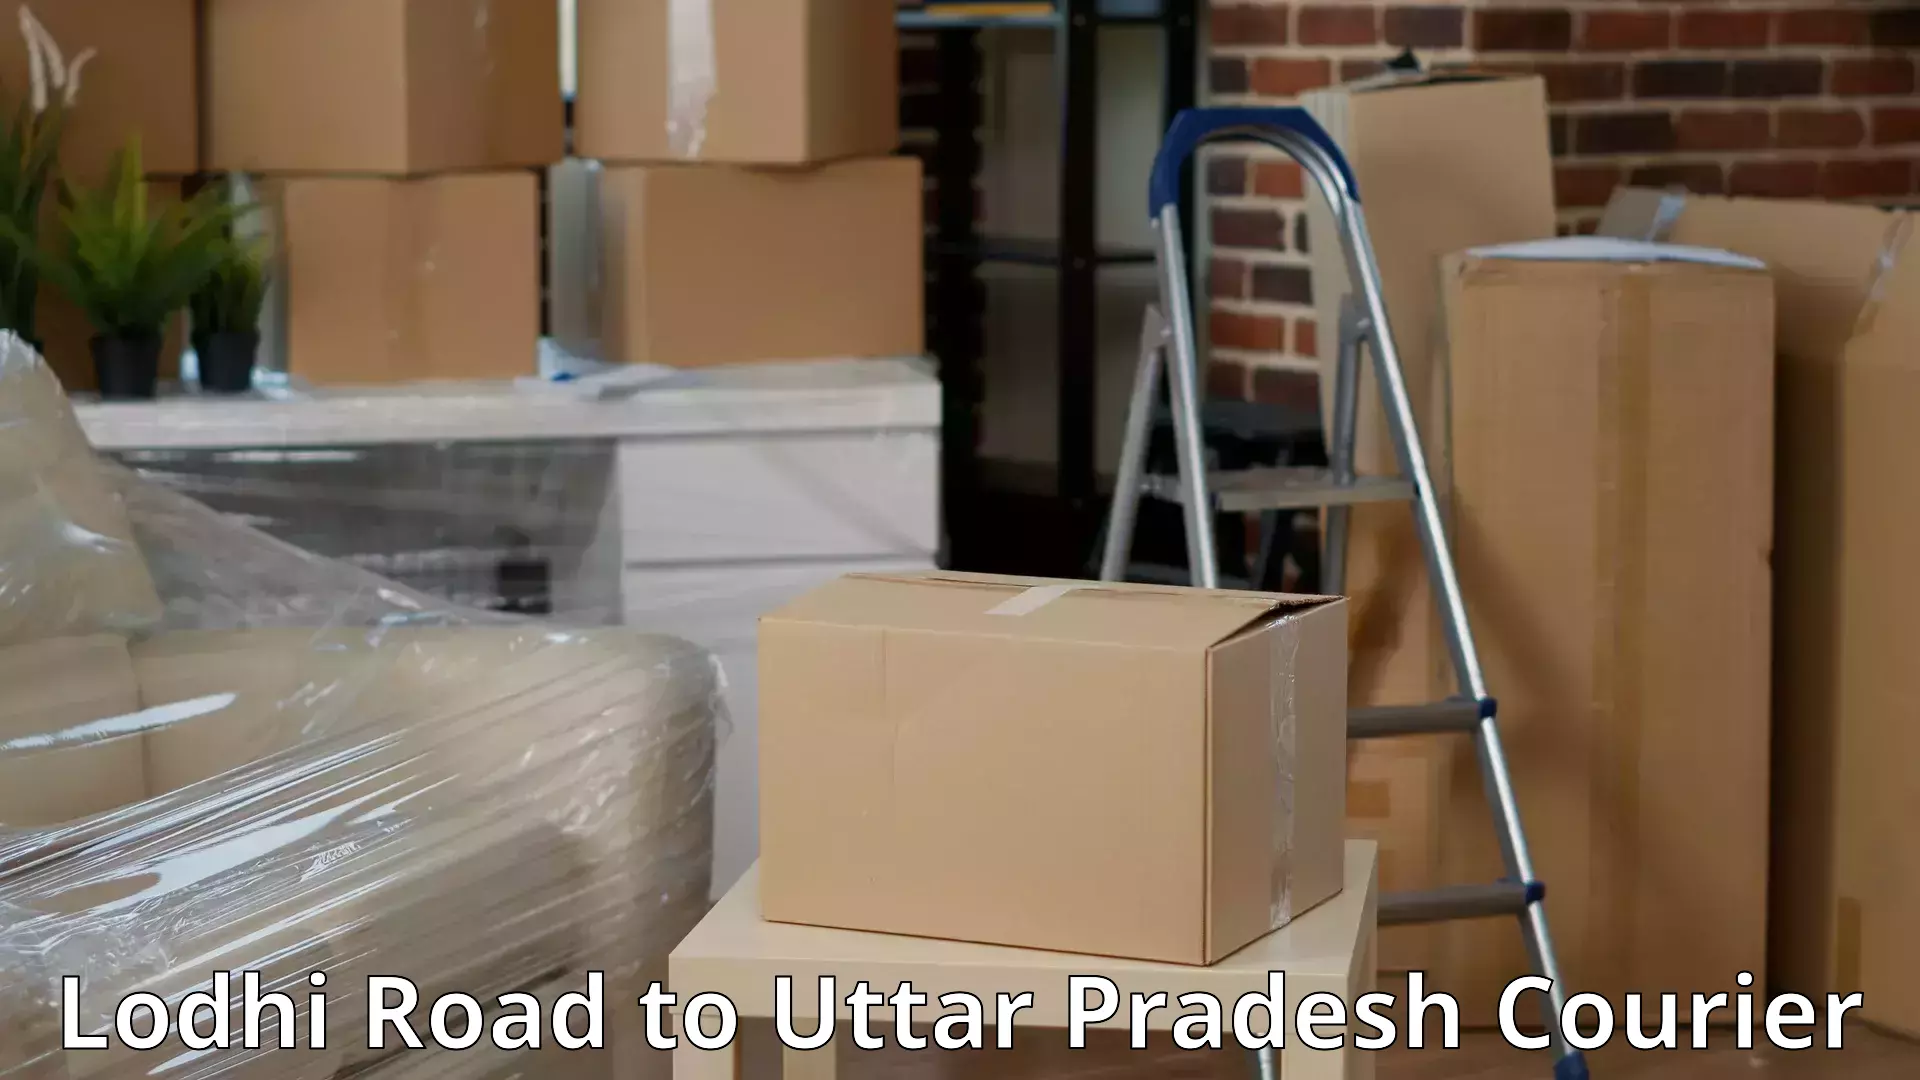 Furniture transport specialists Lodhi Road to Aligarh